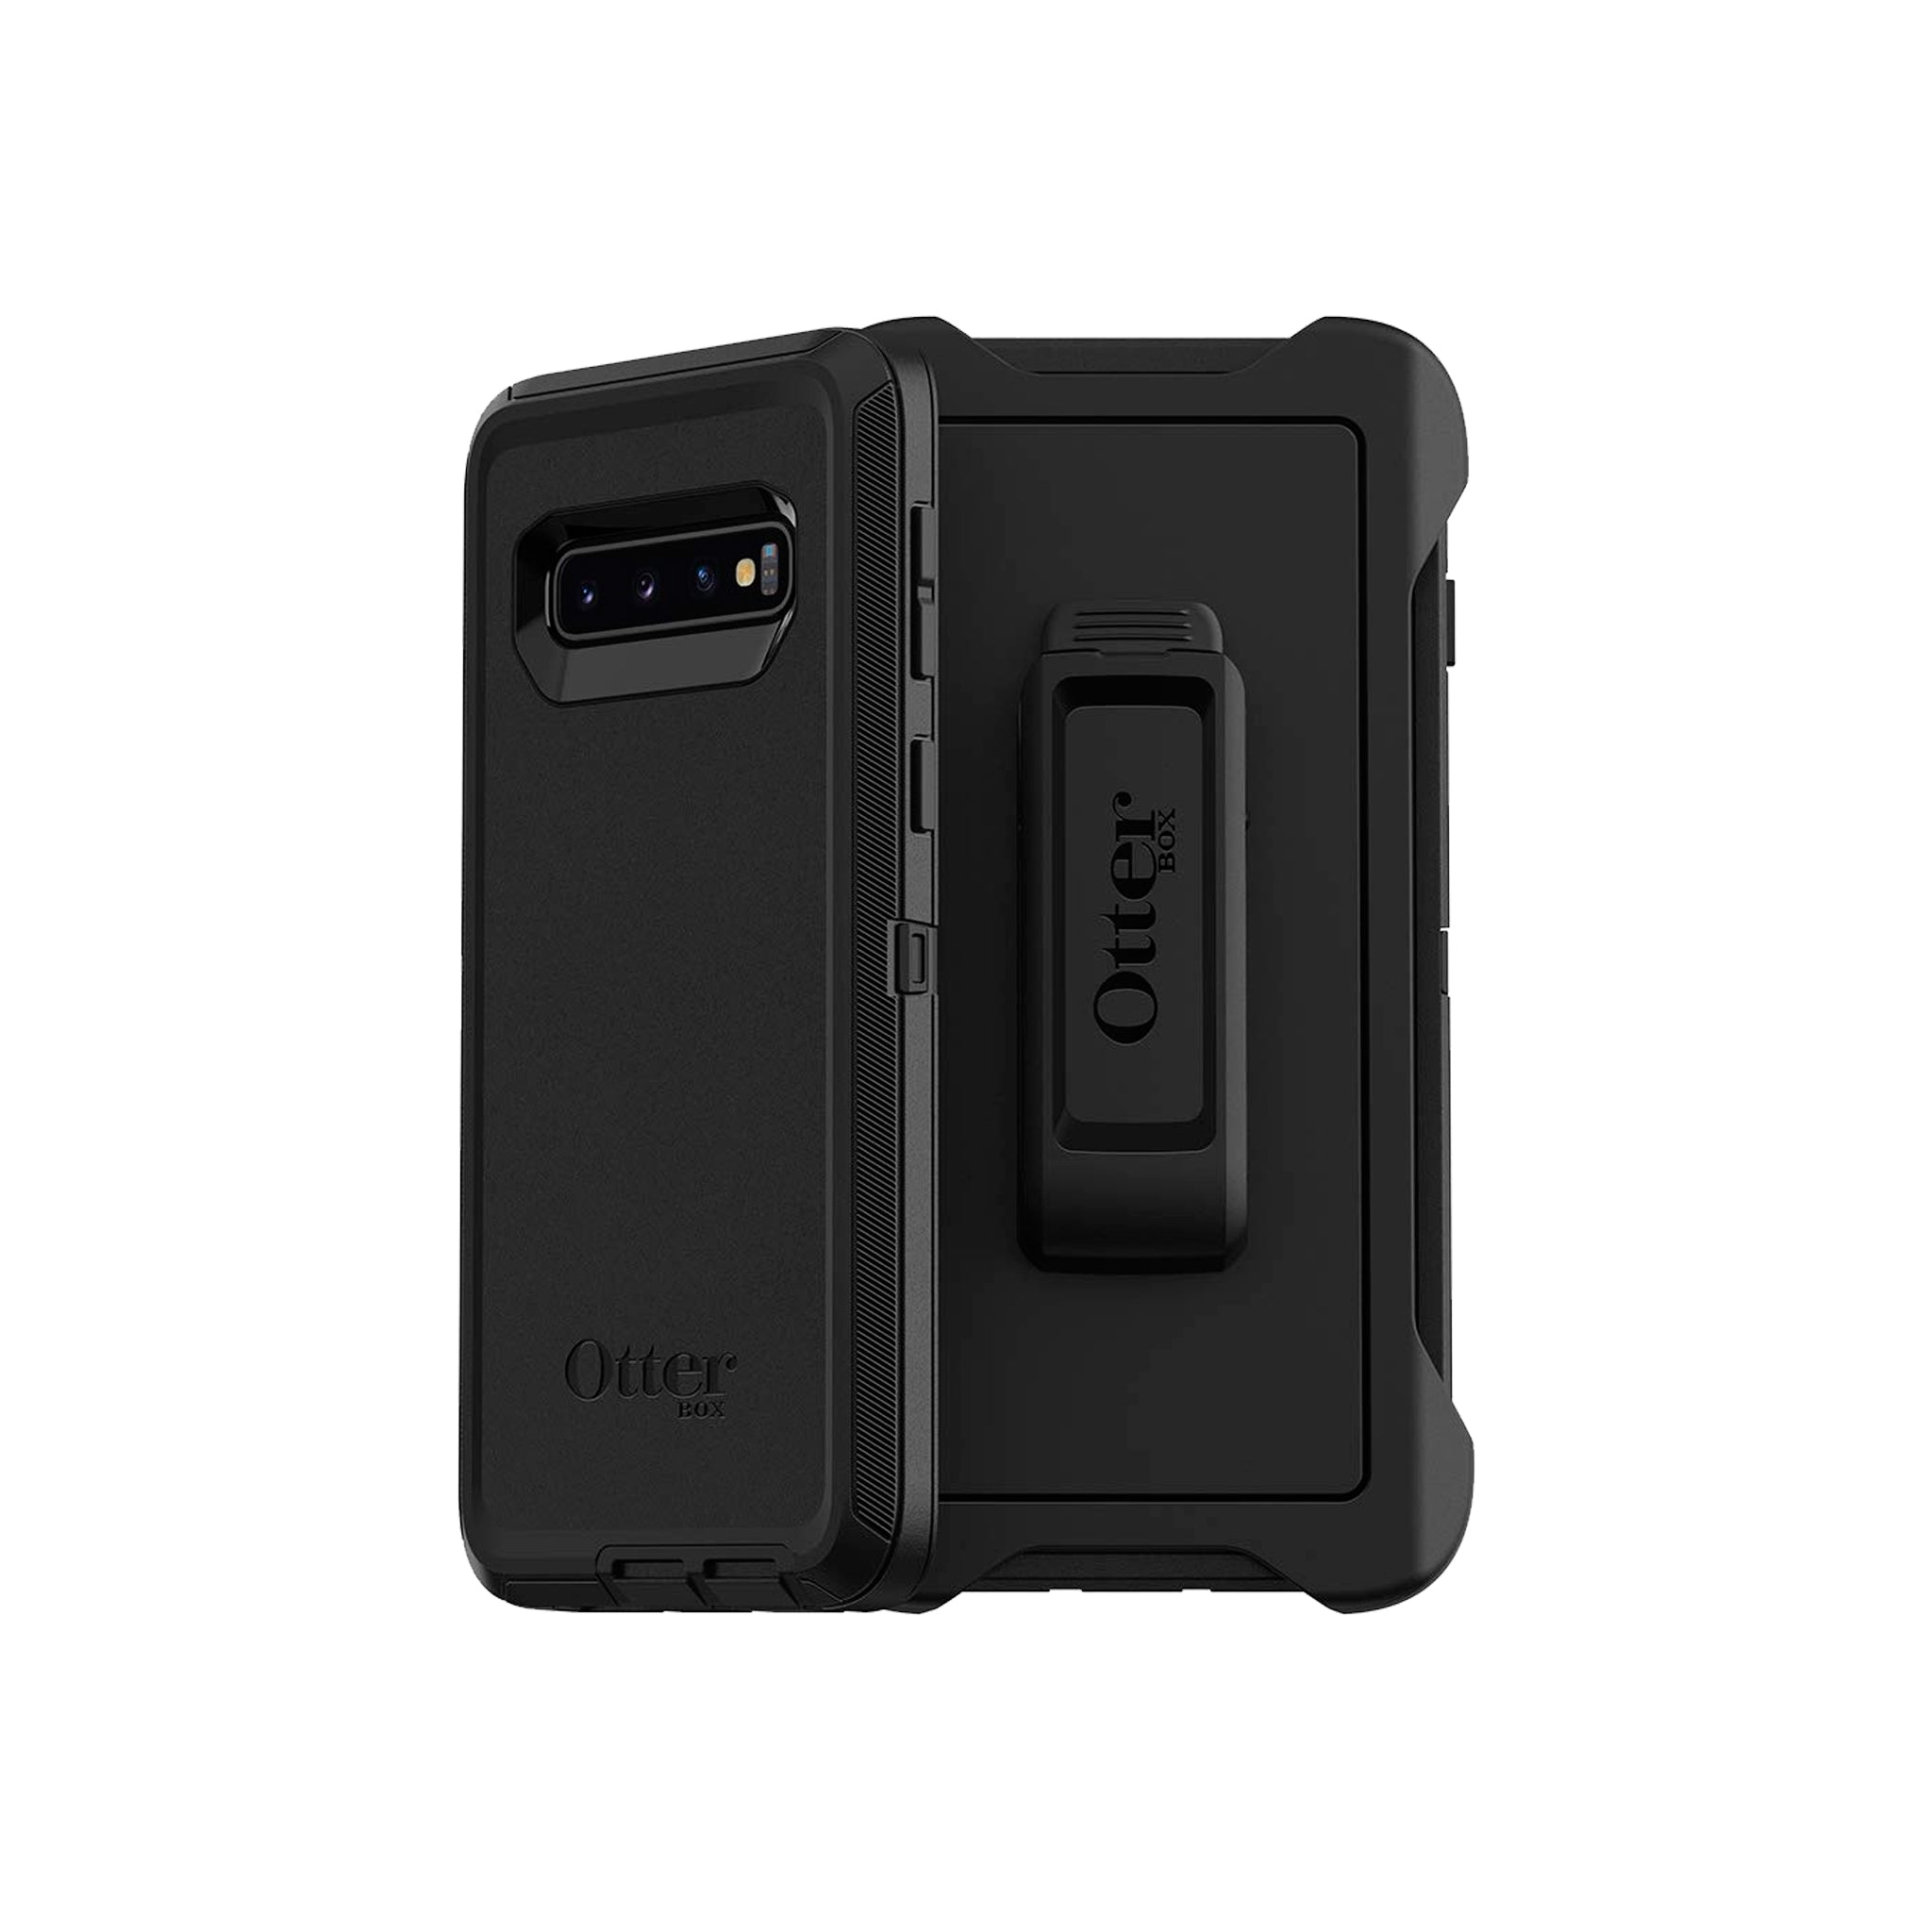 OtterBox - Defender Series Case for Galaxy S10 - Black